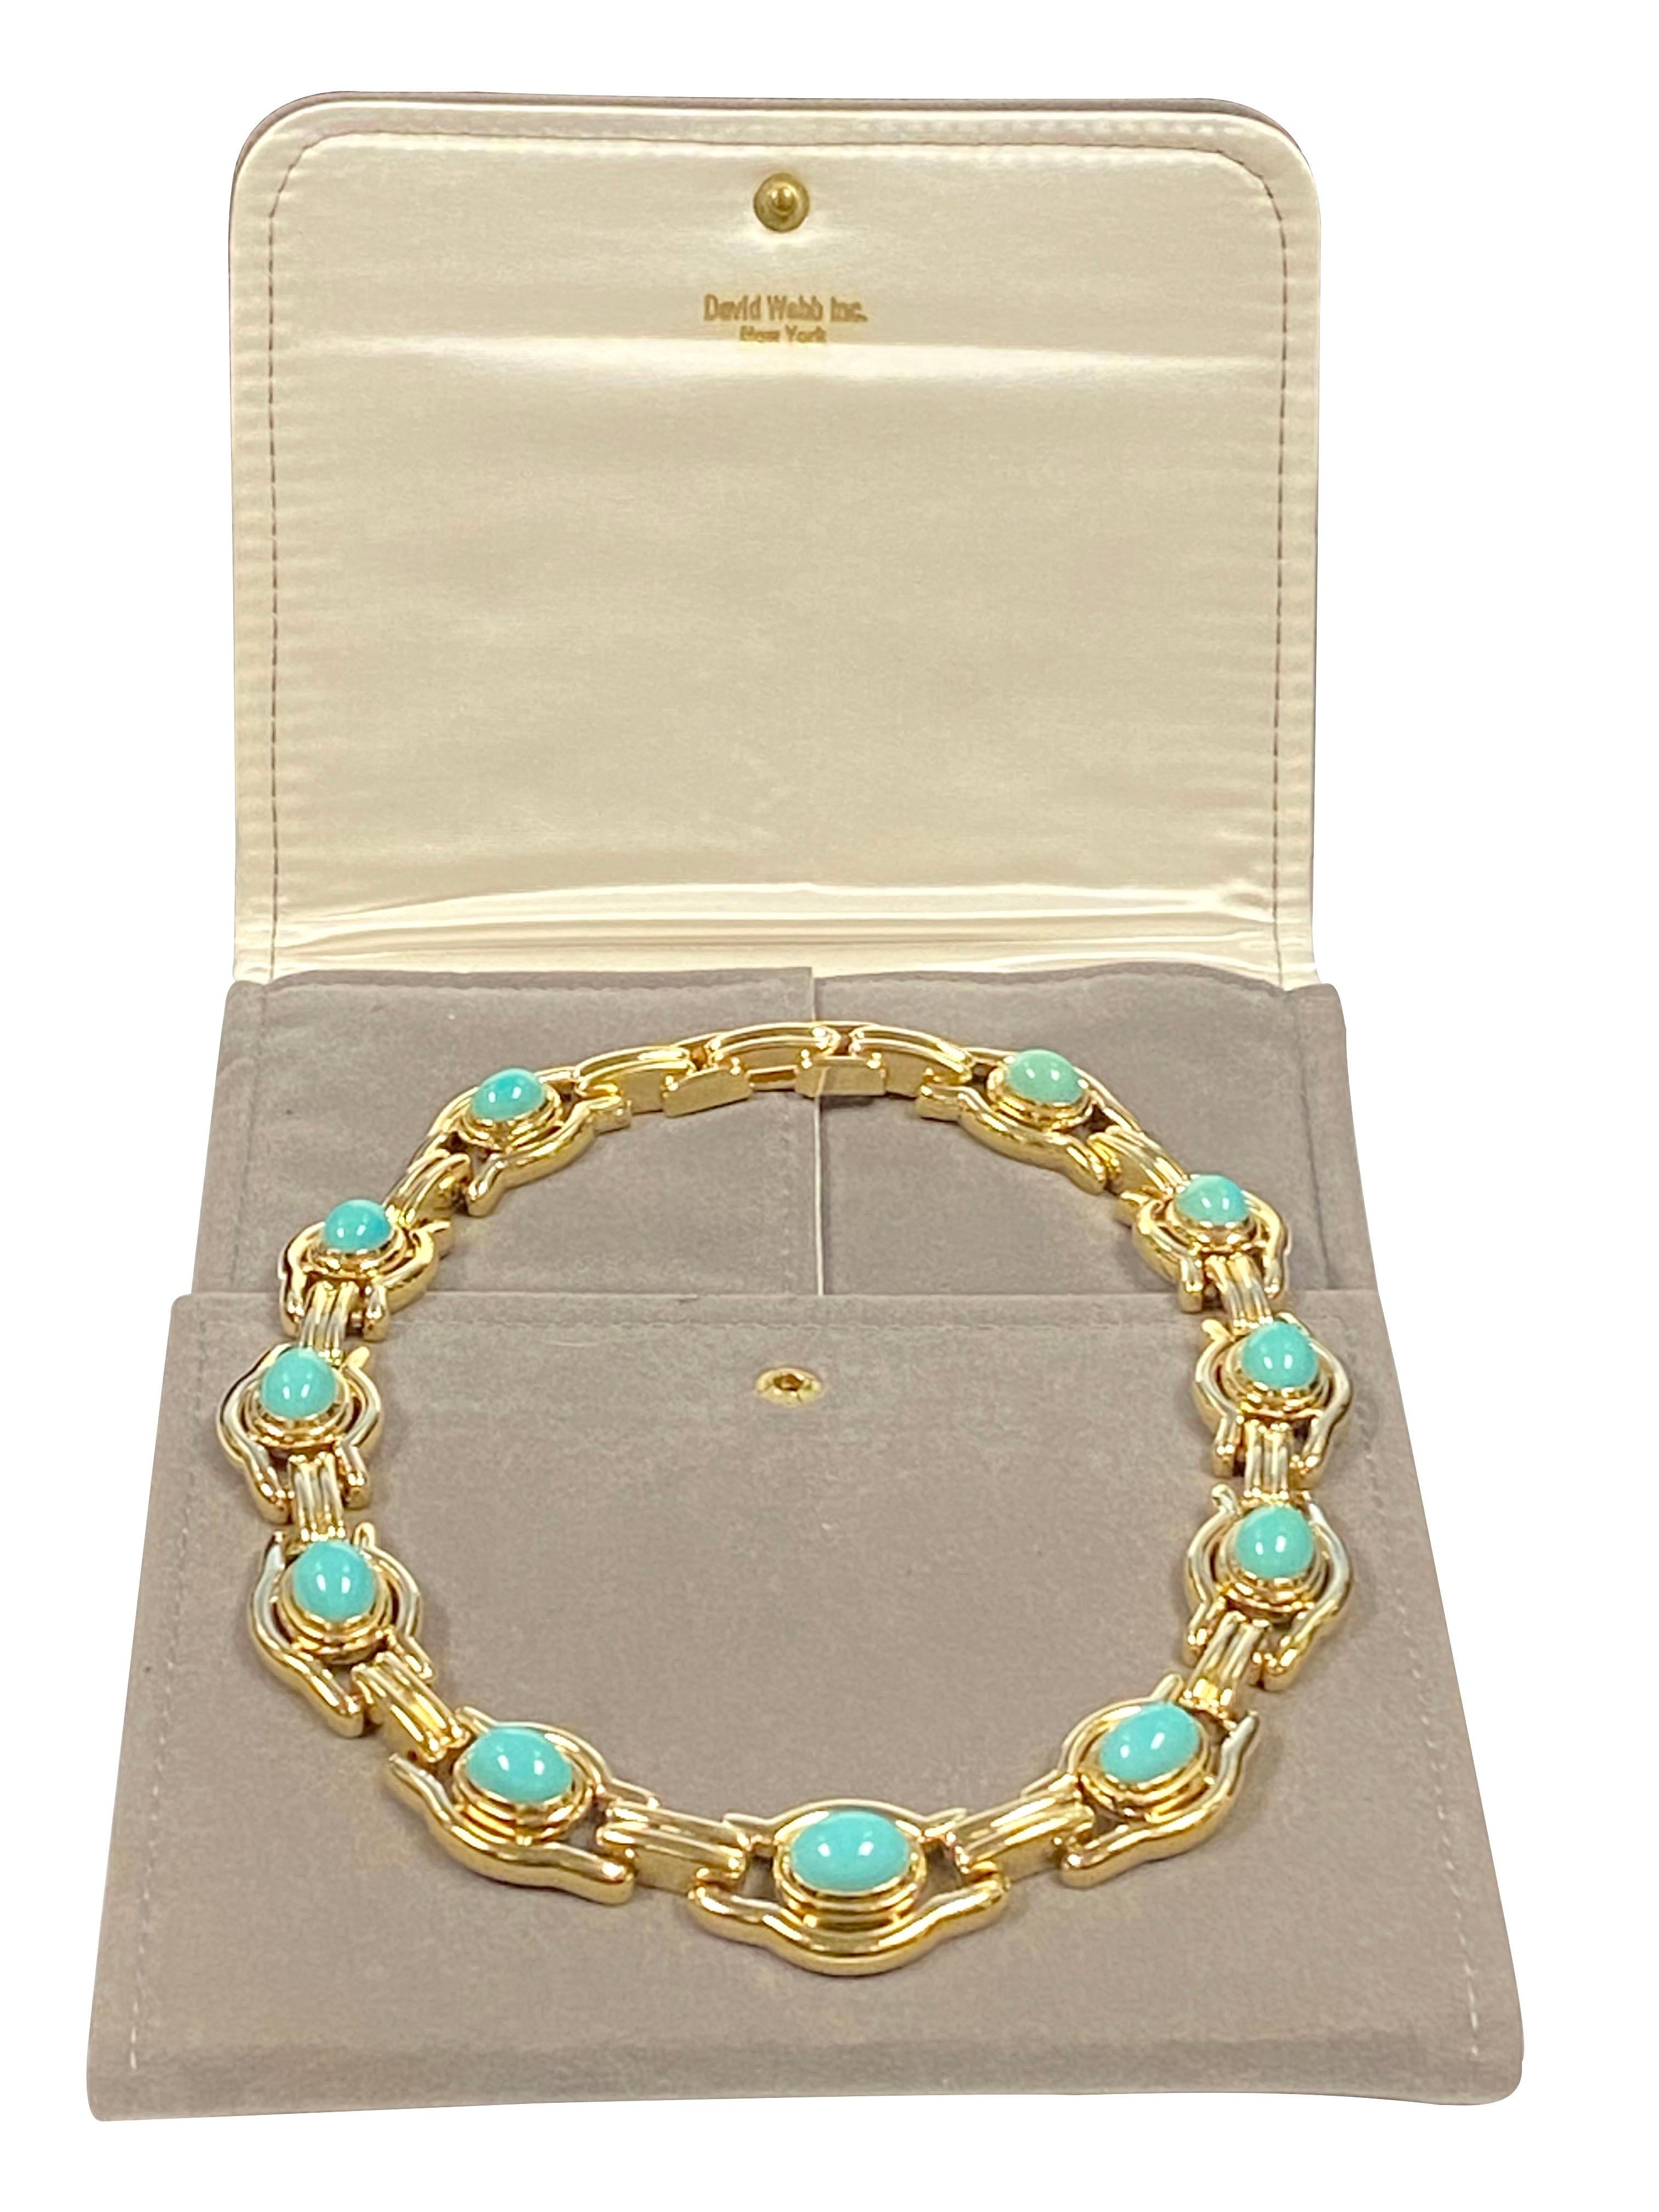 Cabochon David Webb Large Yellow Gold and Persian Turquoise Necklace For Sale